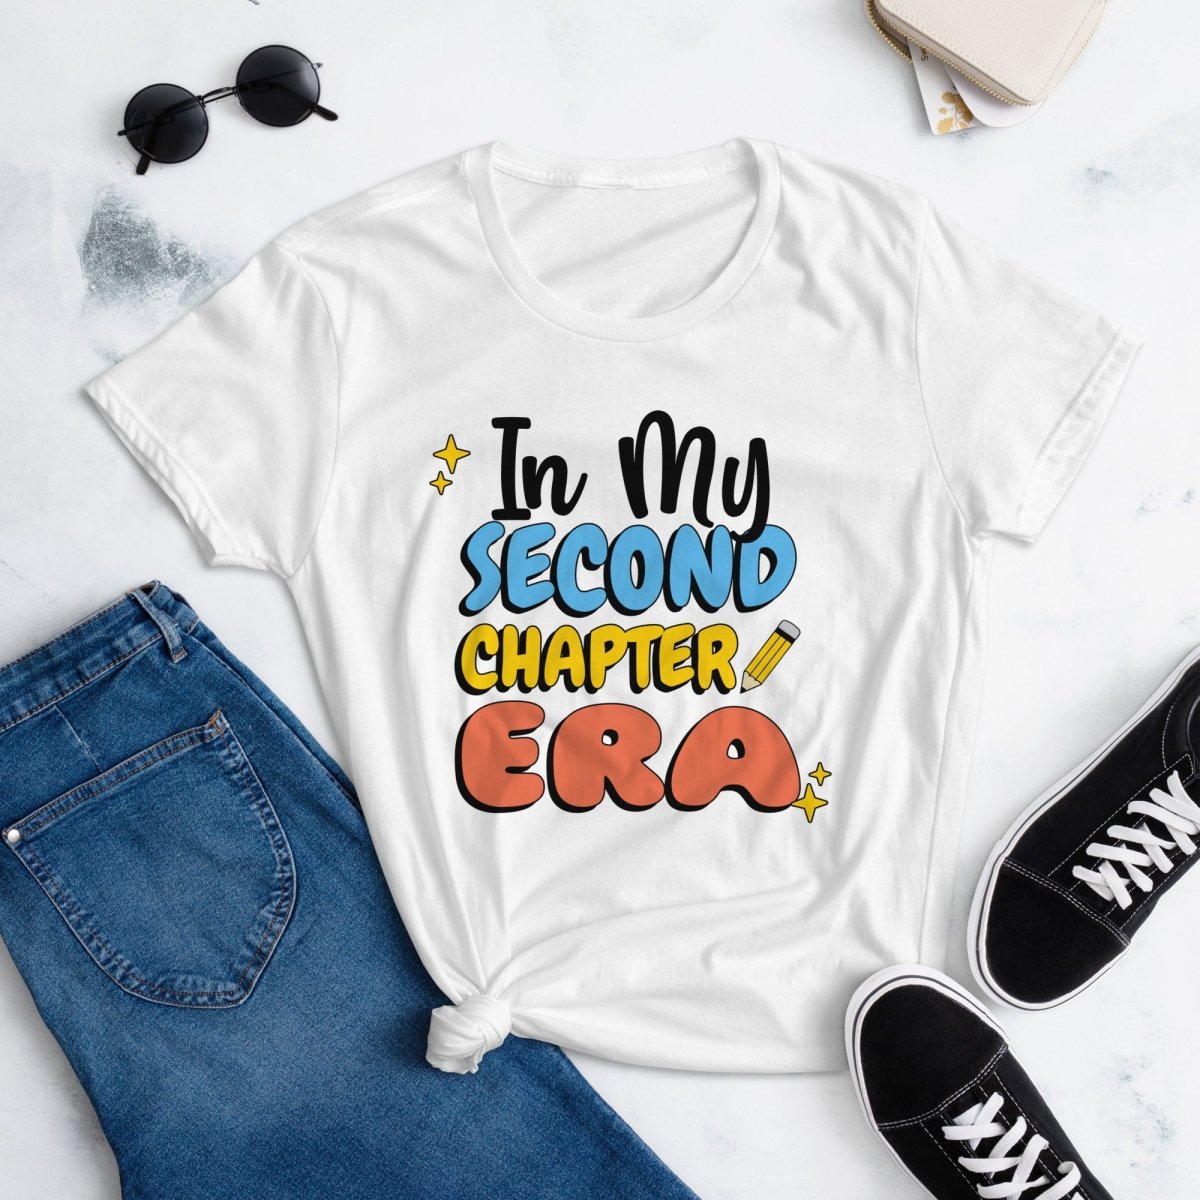 Second Chapter Era Women's Fashion Fit Tee - Sobervation